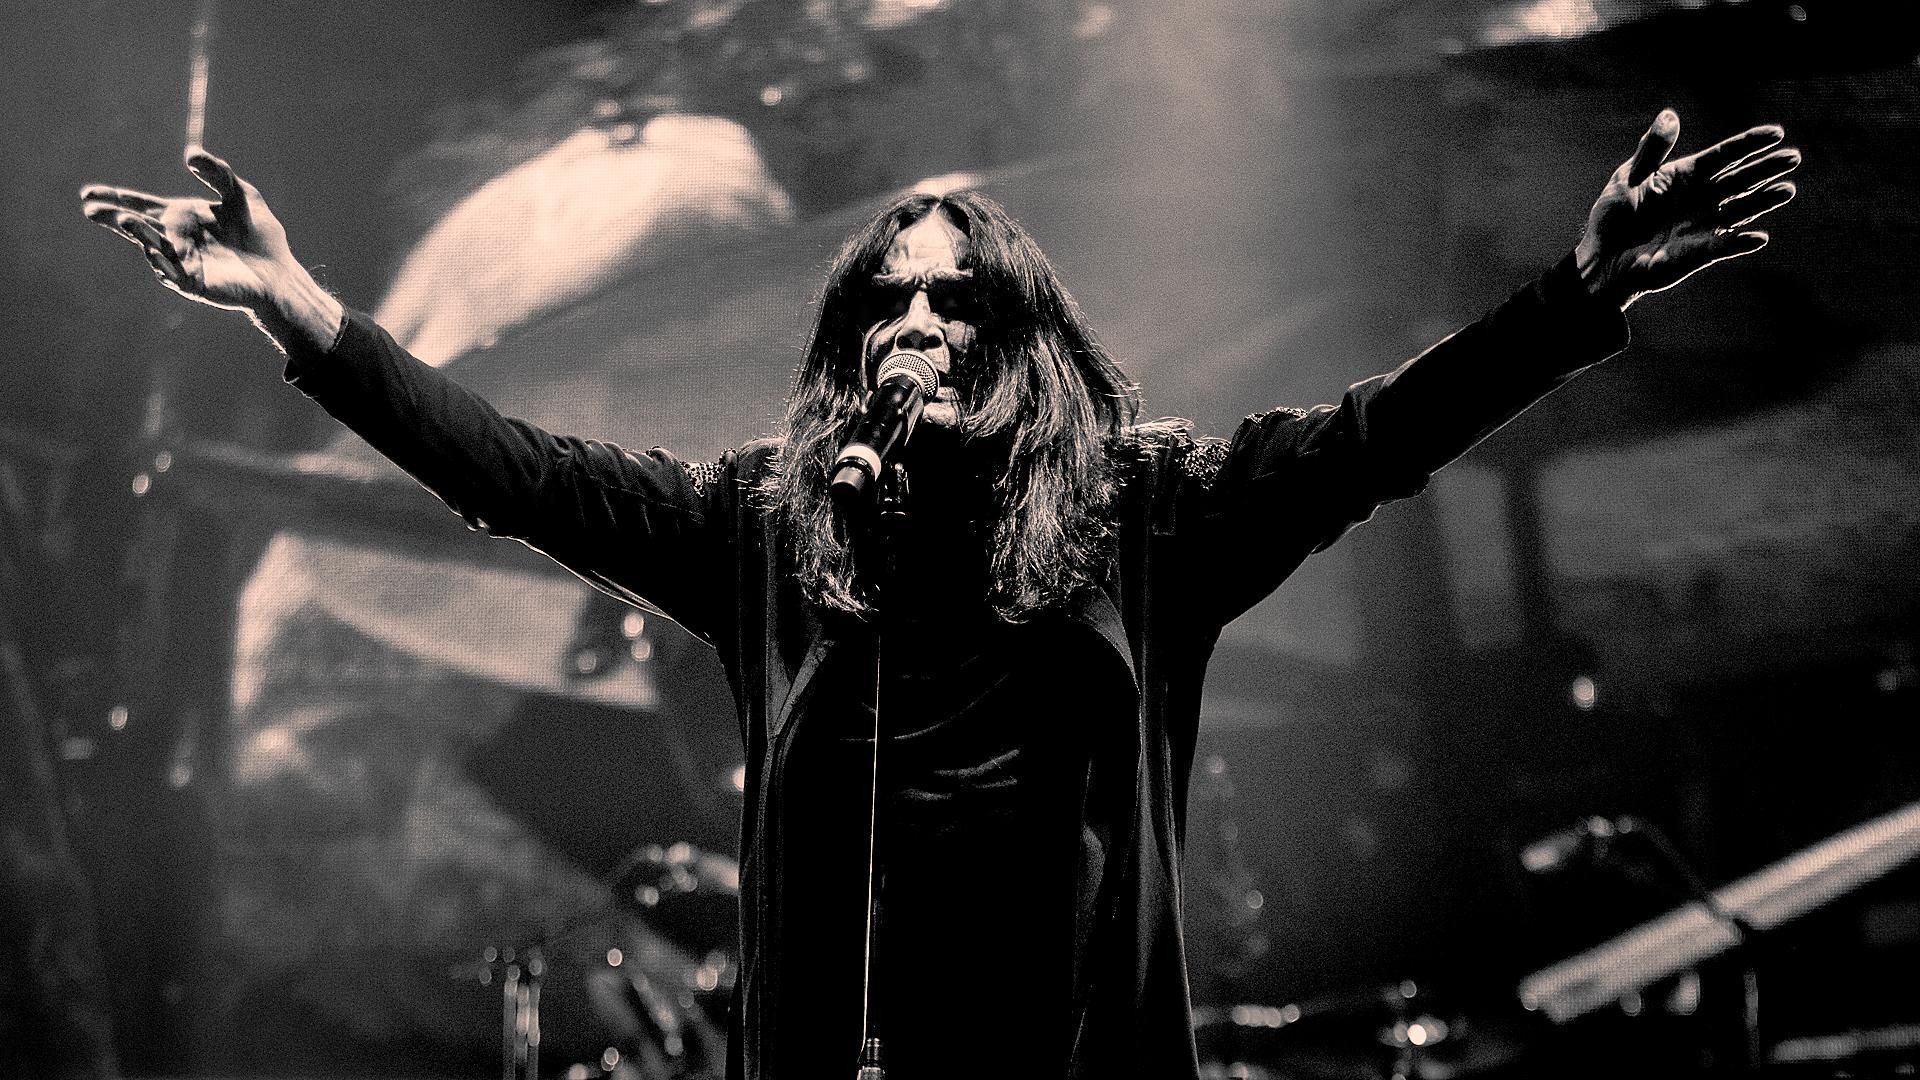 1920x1080 Ozzy Osbourne - Hands in the Air